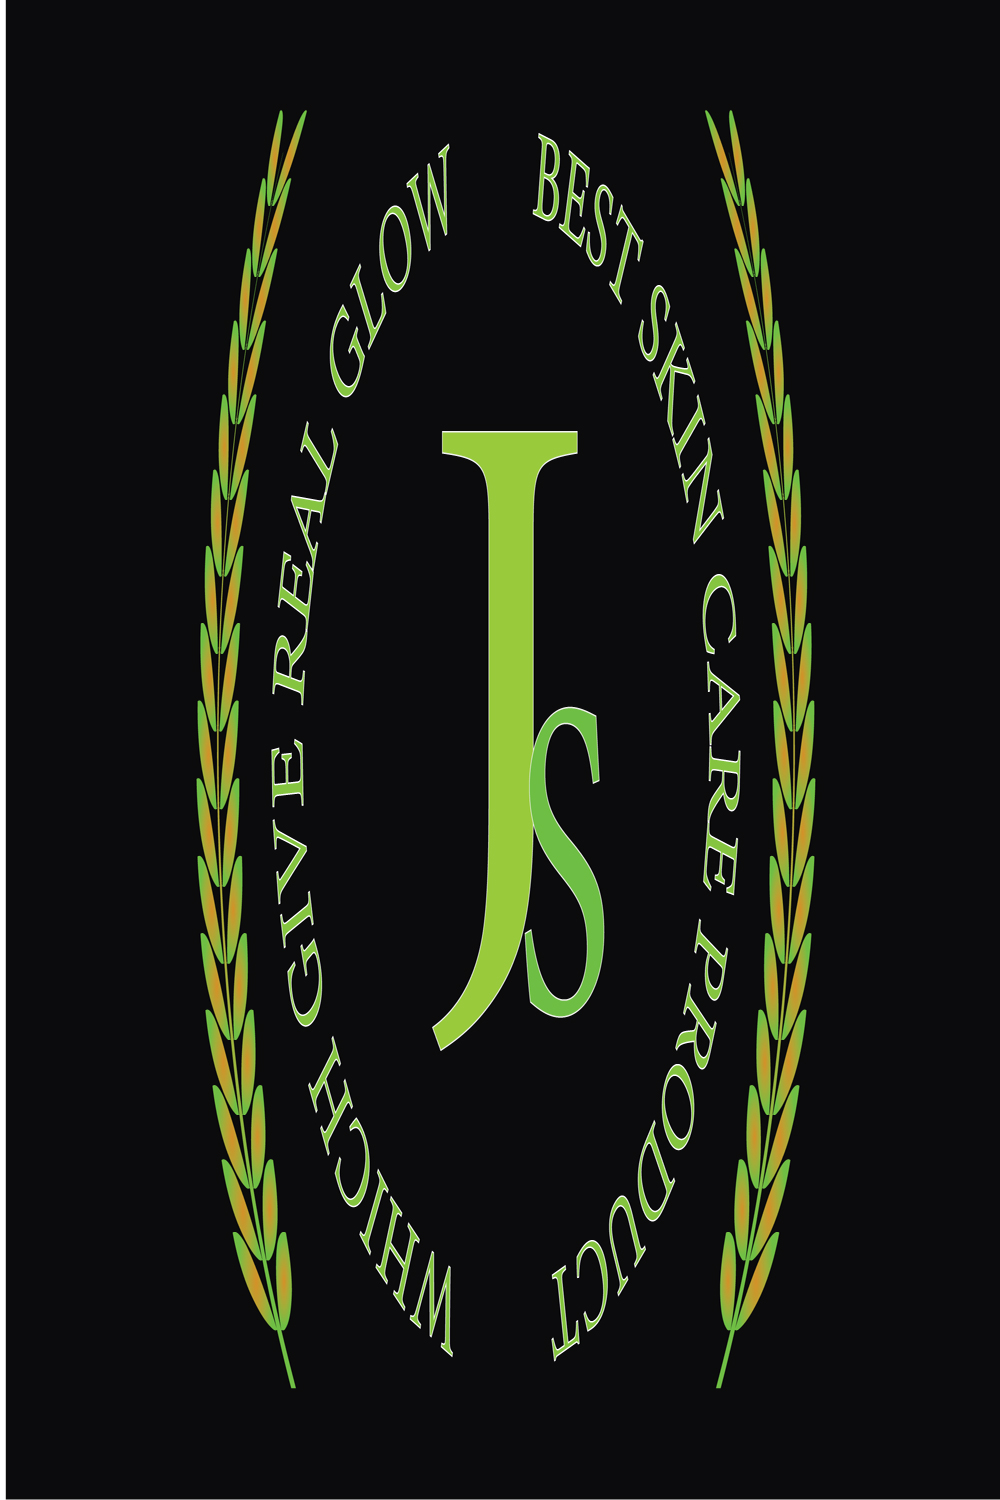 JS word logo for you pinterest preview image.